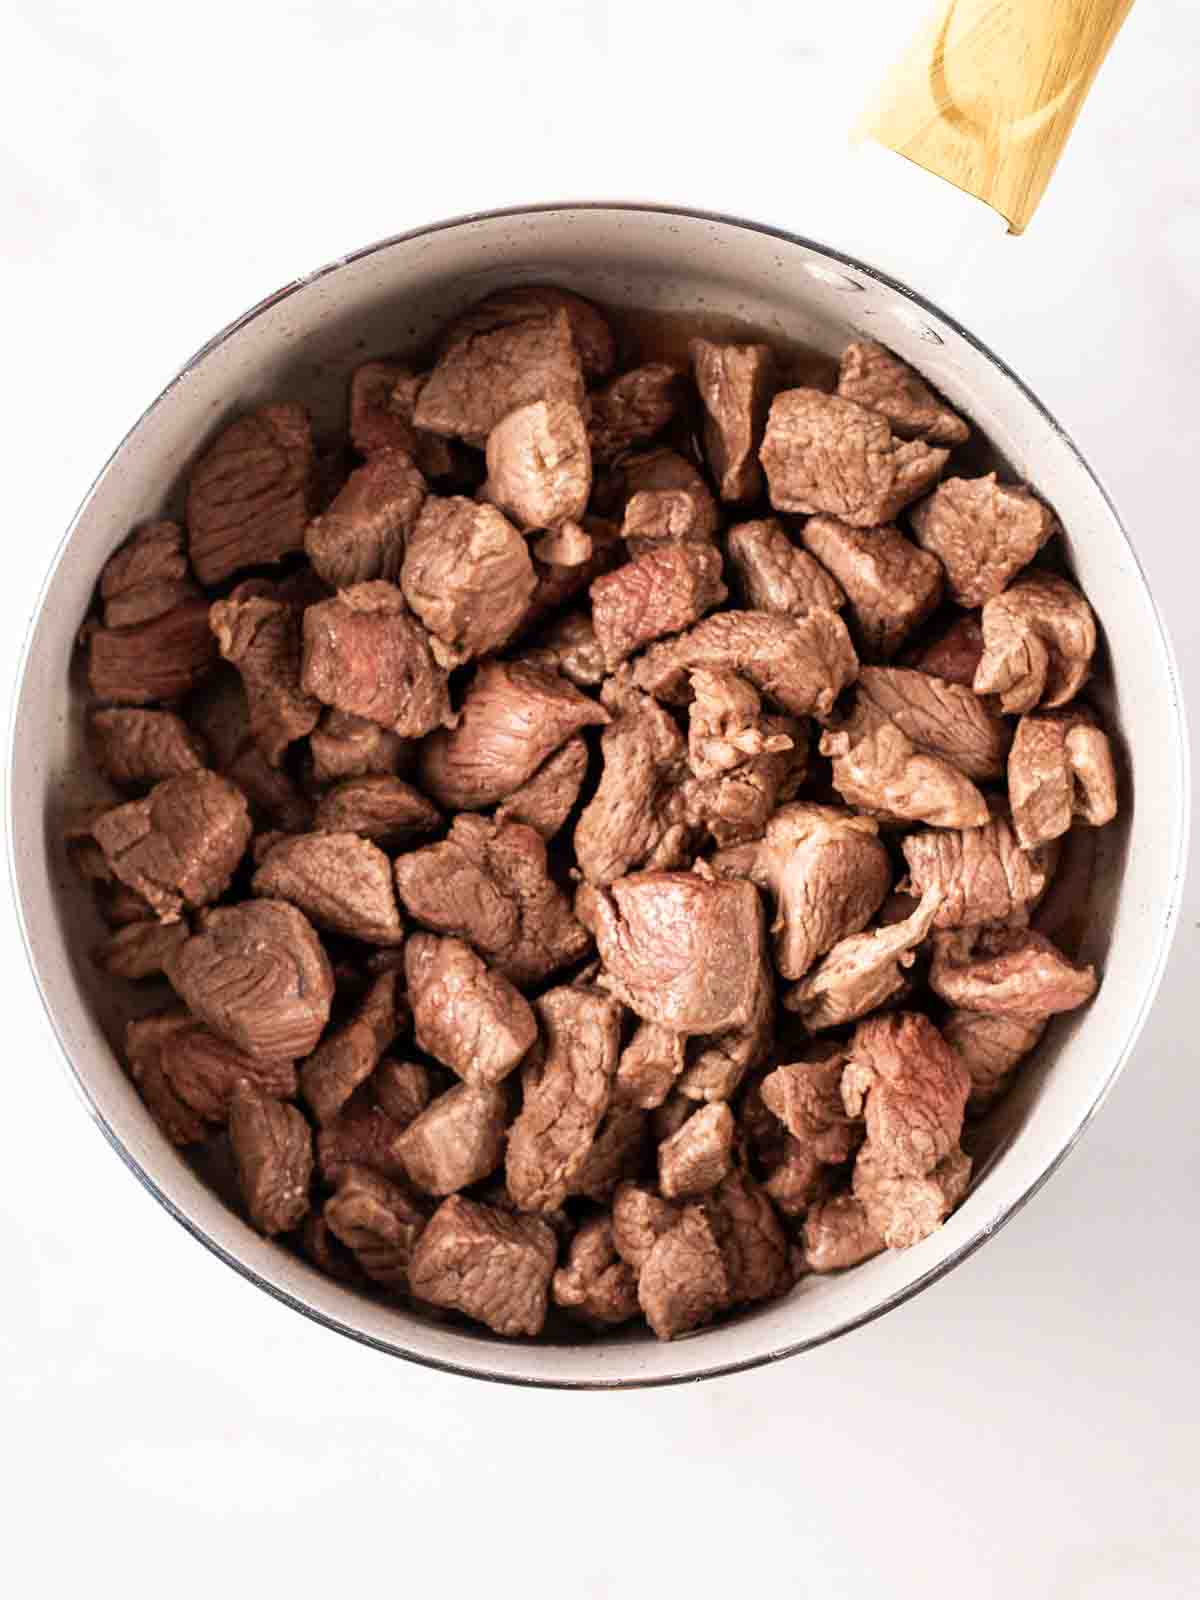 Browned lamb meat in chunks in a pan for step 1 in the recipe for Lamb Tagine.